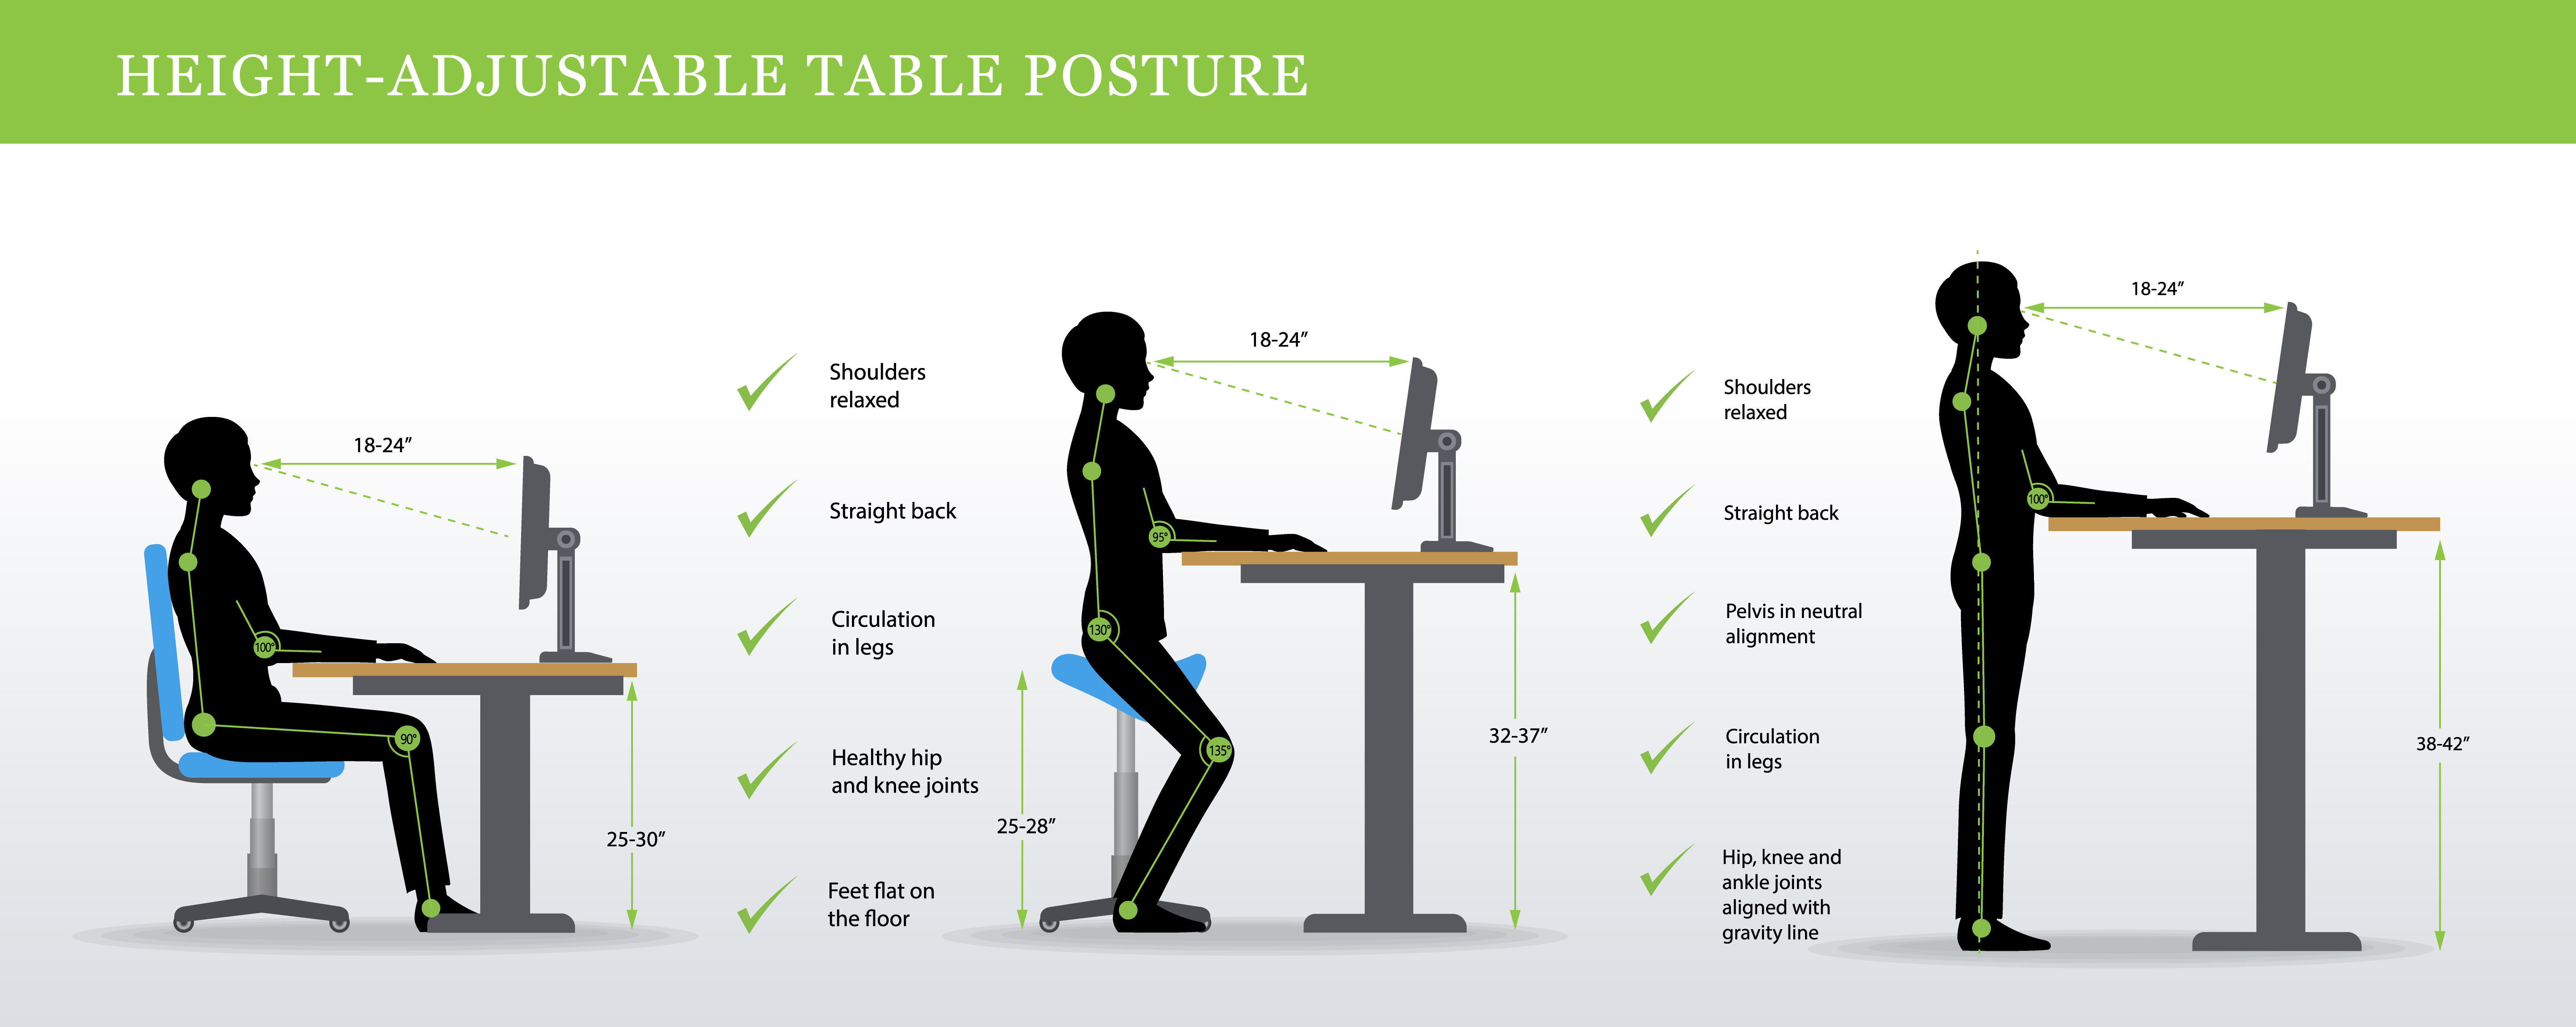 Improve your posture at work